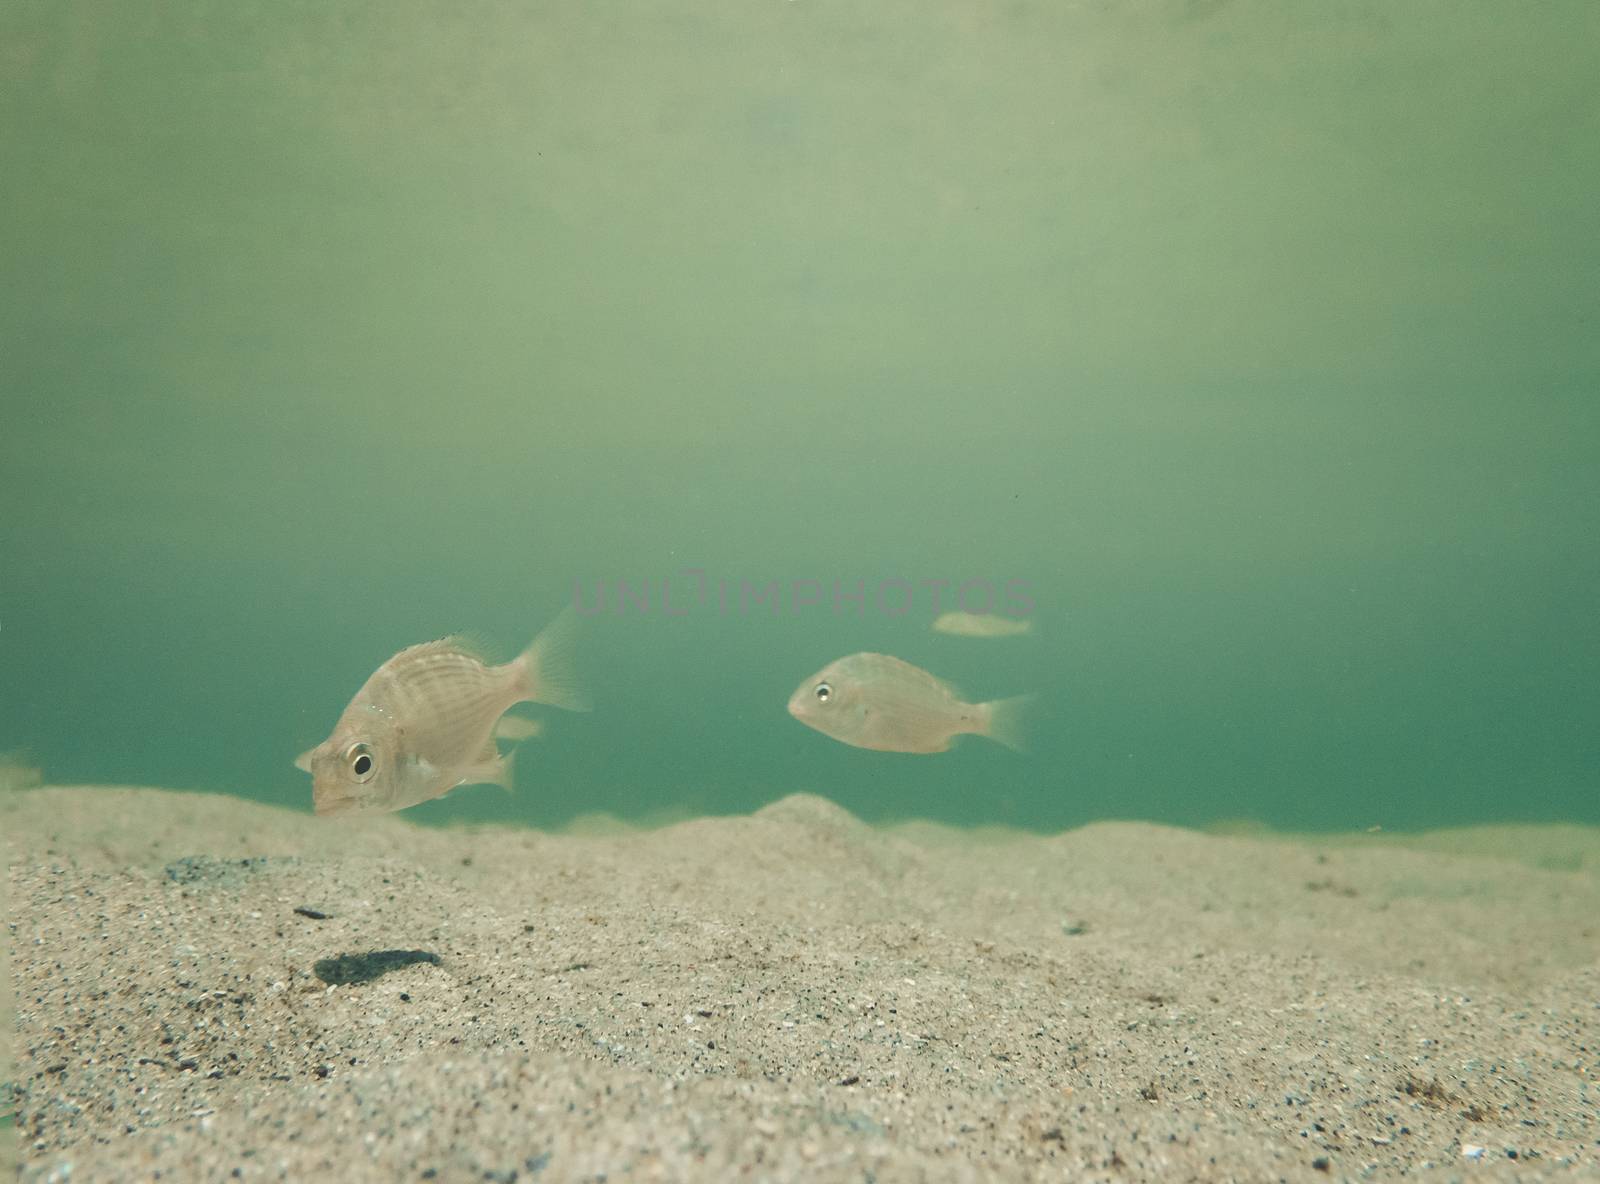 Inquisitive baby fish swimming on the sandy sea floor.  Space for copy